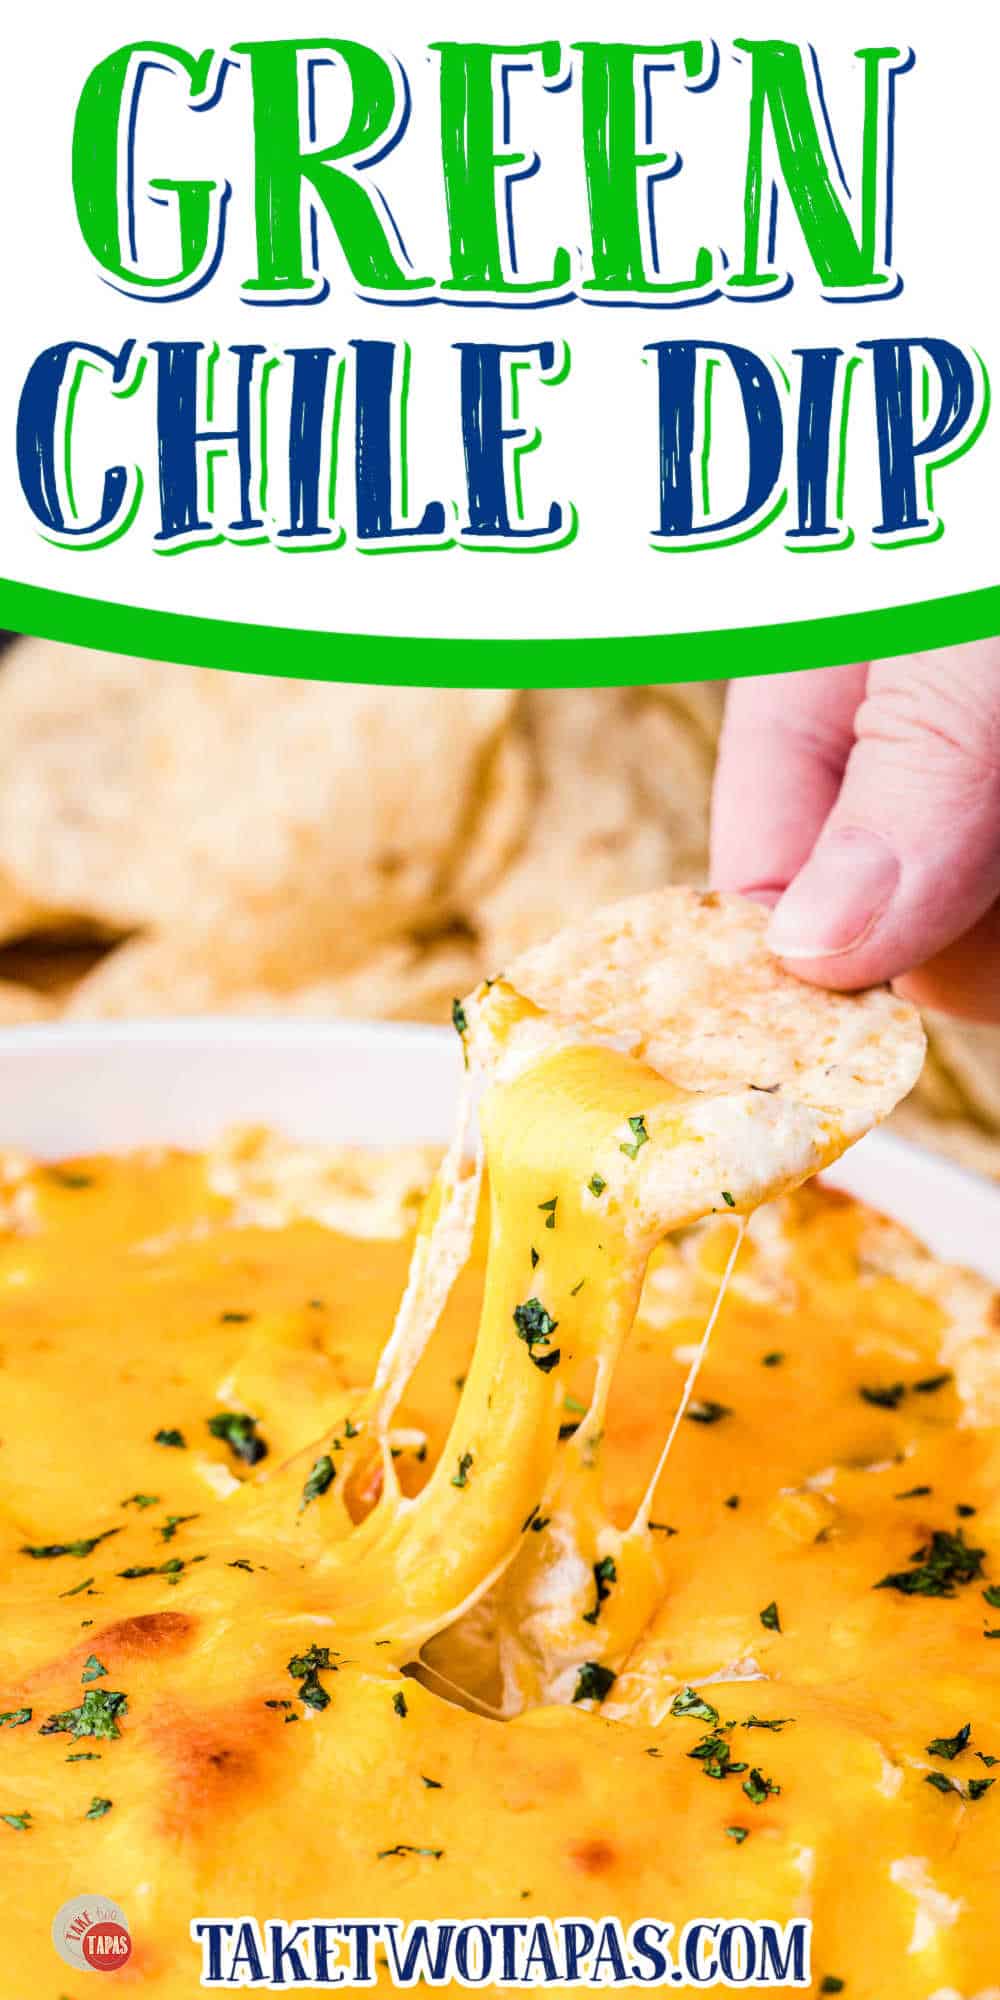 chip stretching cheese off a bowl of dip with the text "Green Chile Dip"